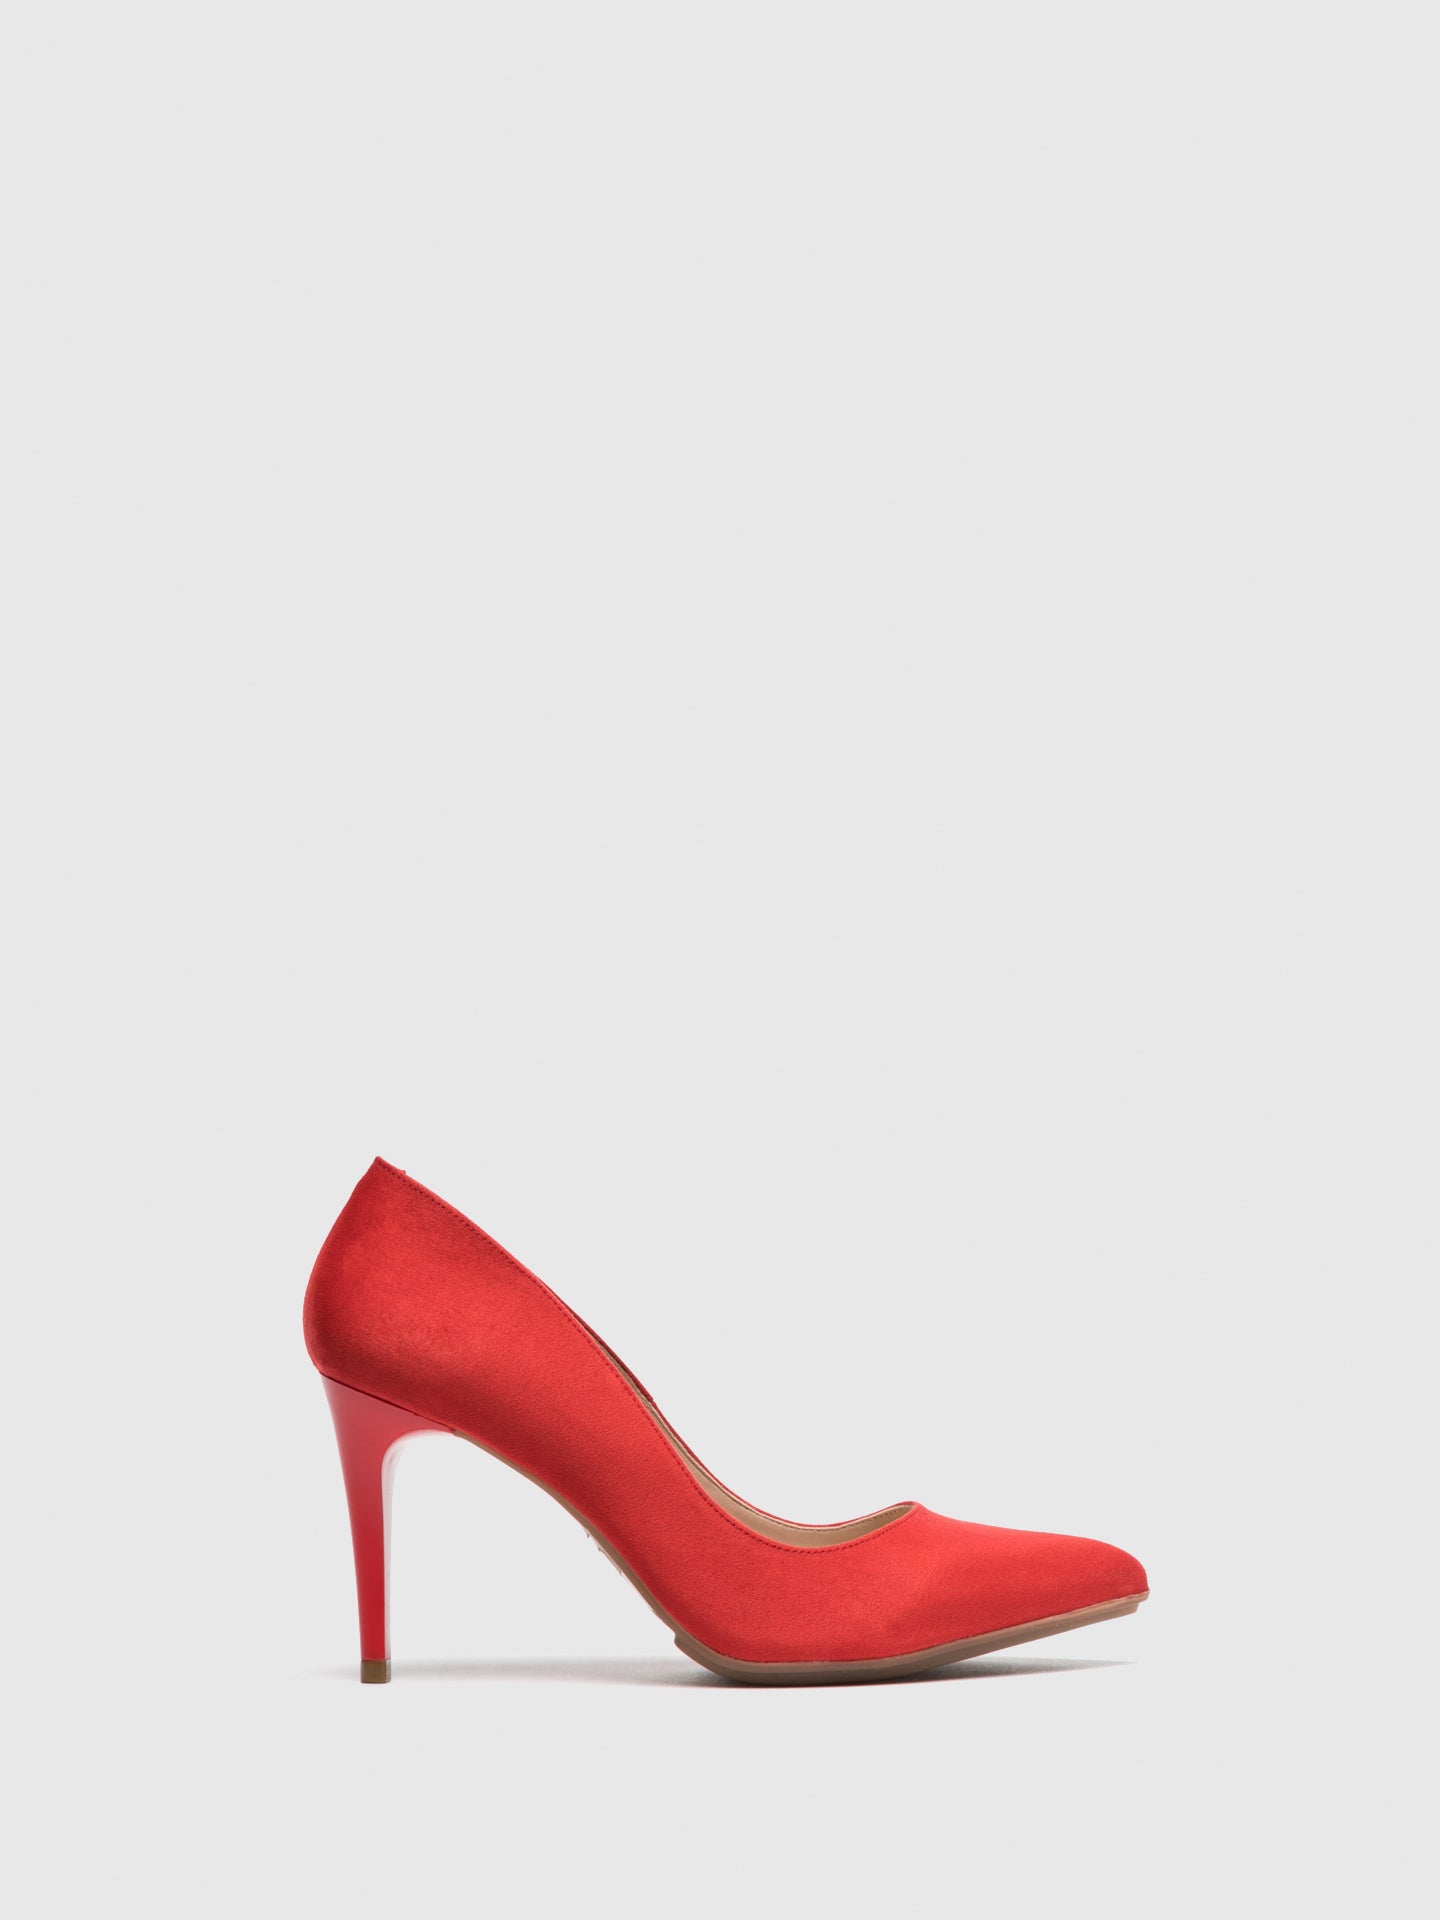 Foreva Red Classic Pumps